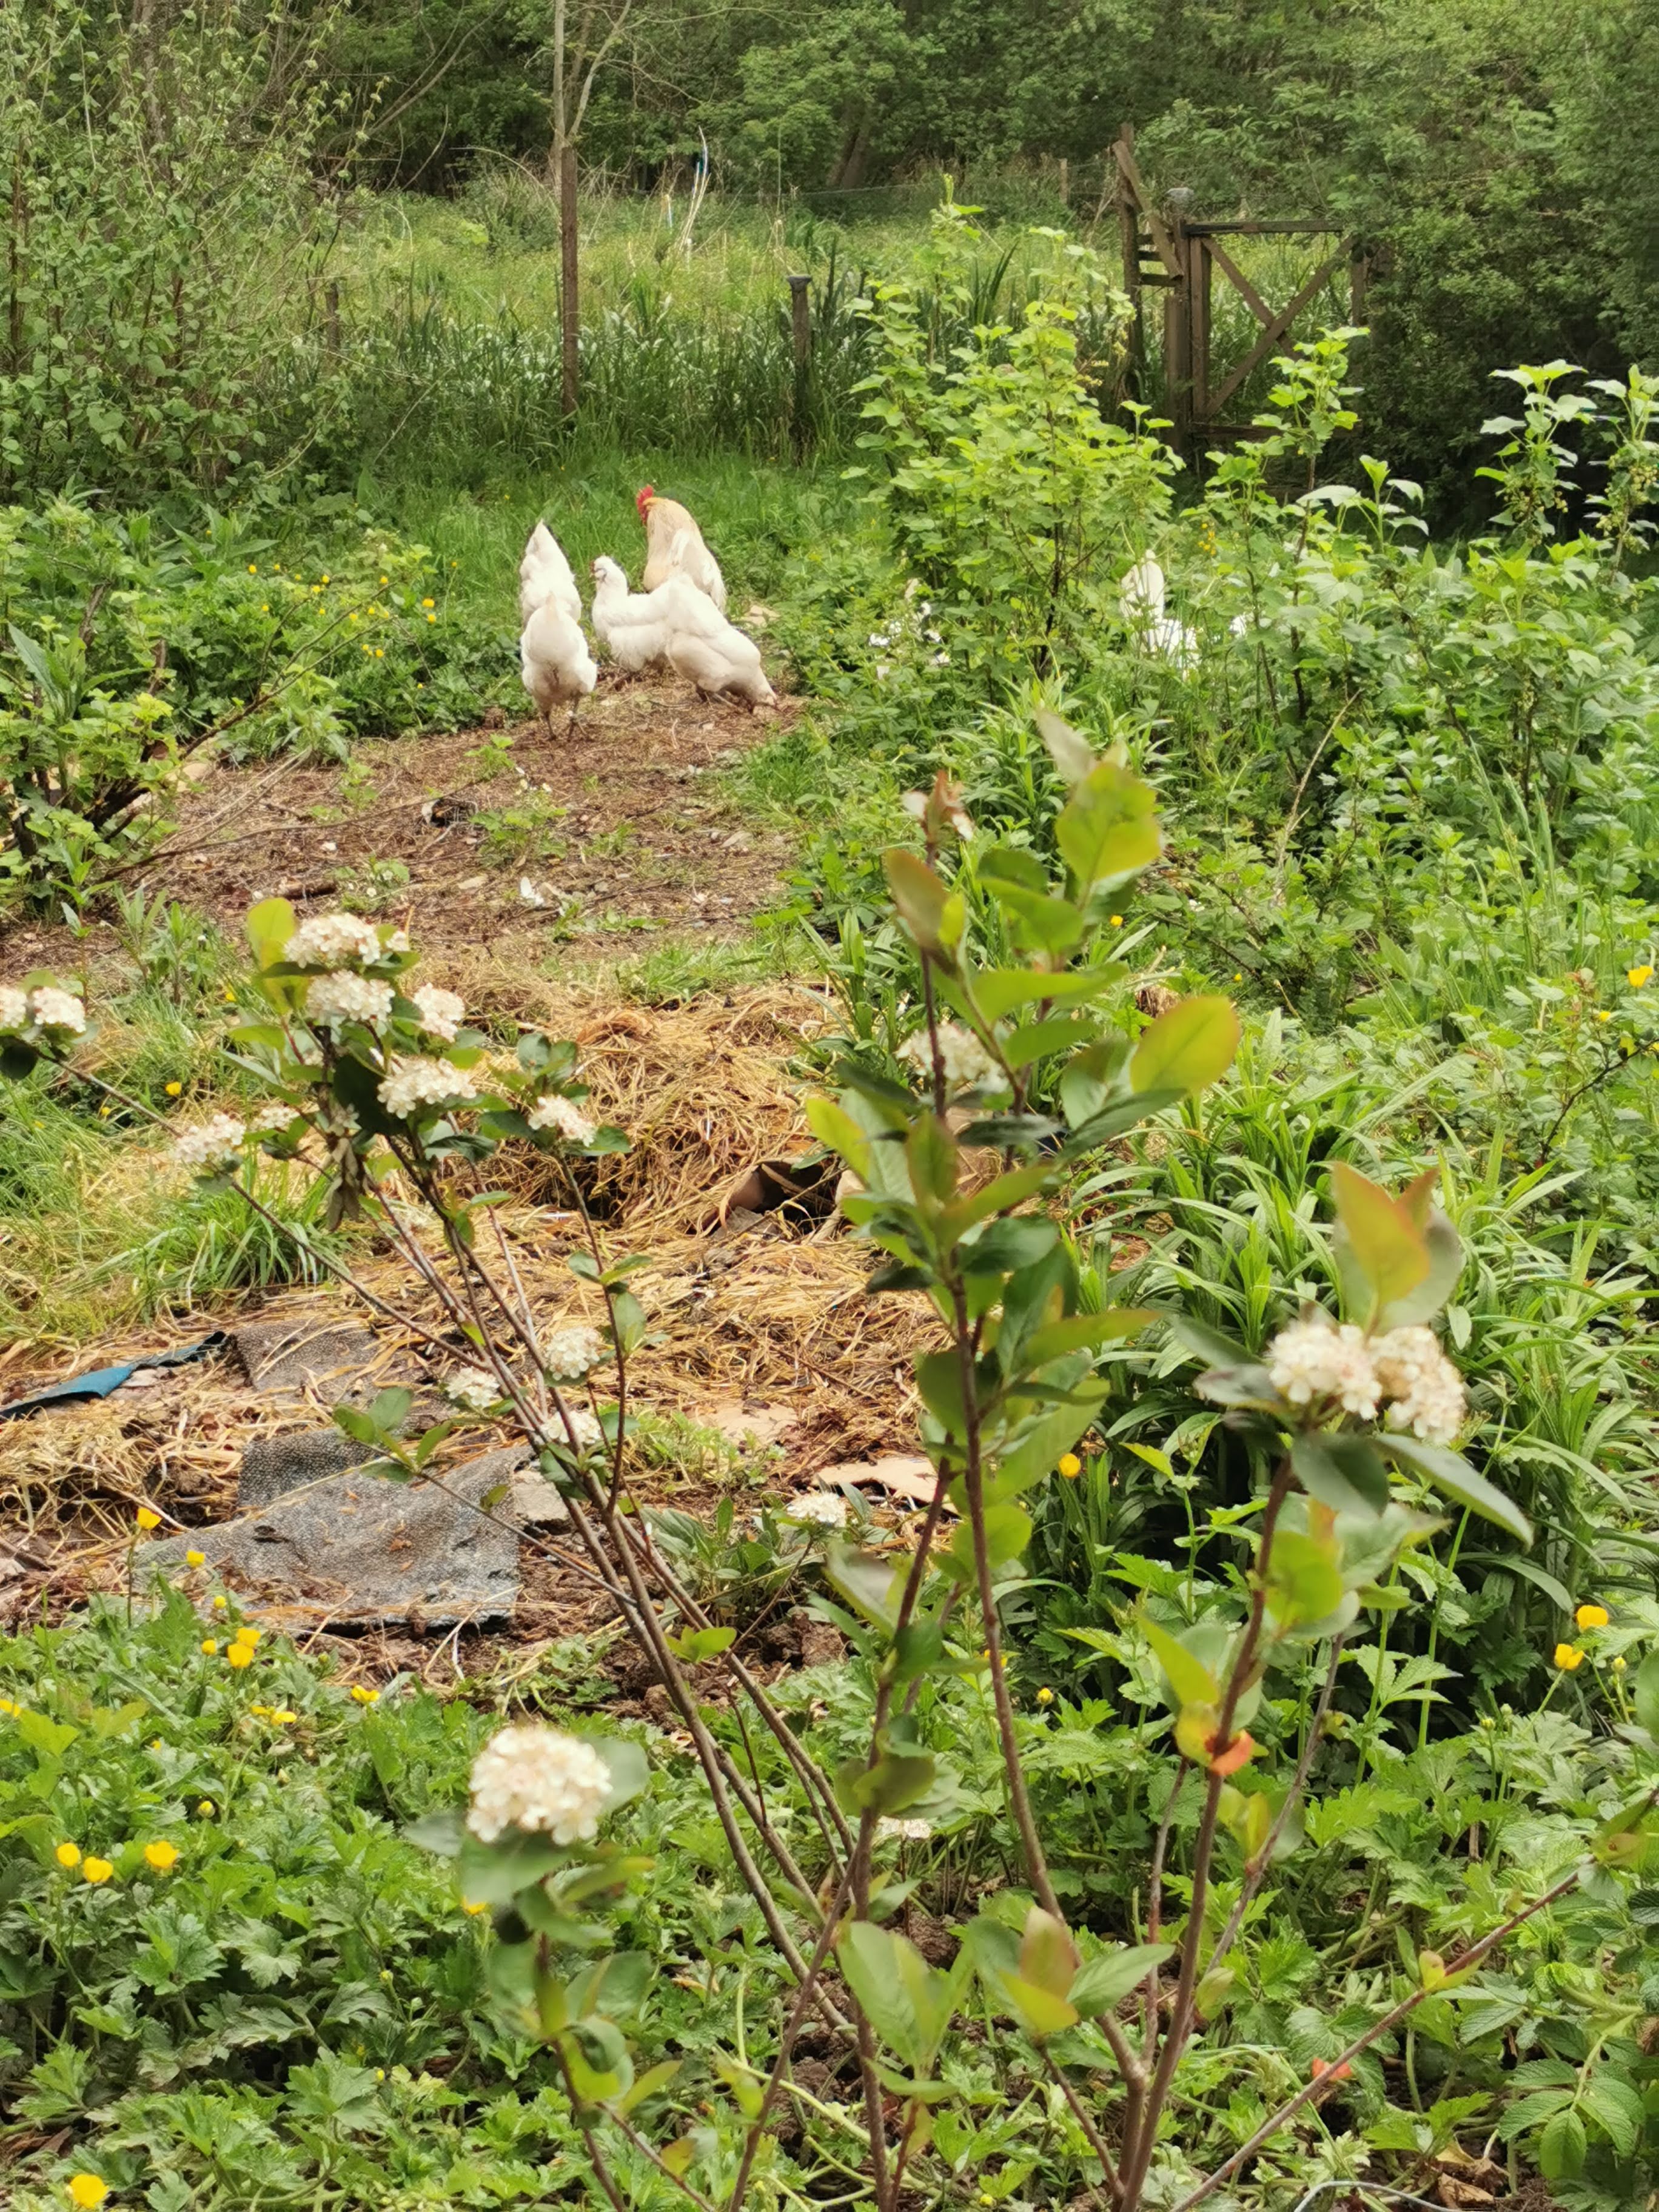 Chickens on the mound, foraging in the polyculture